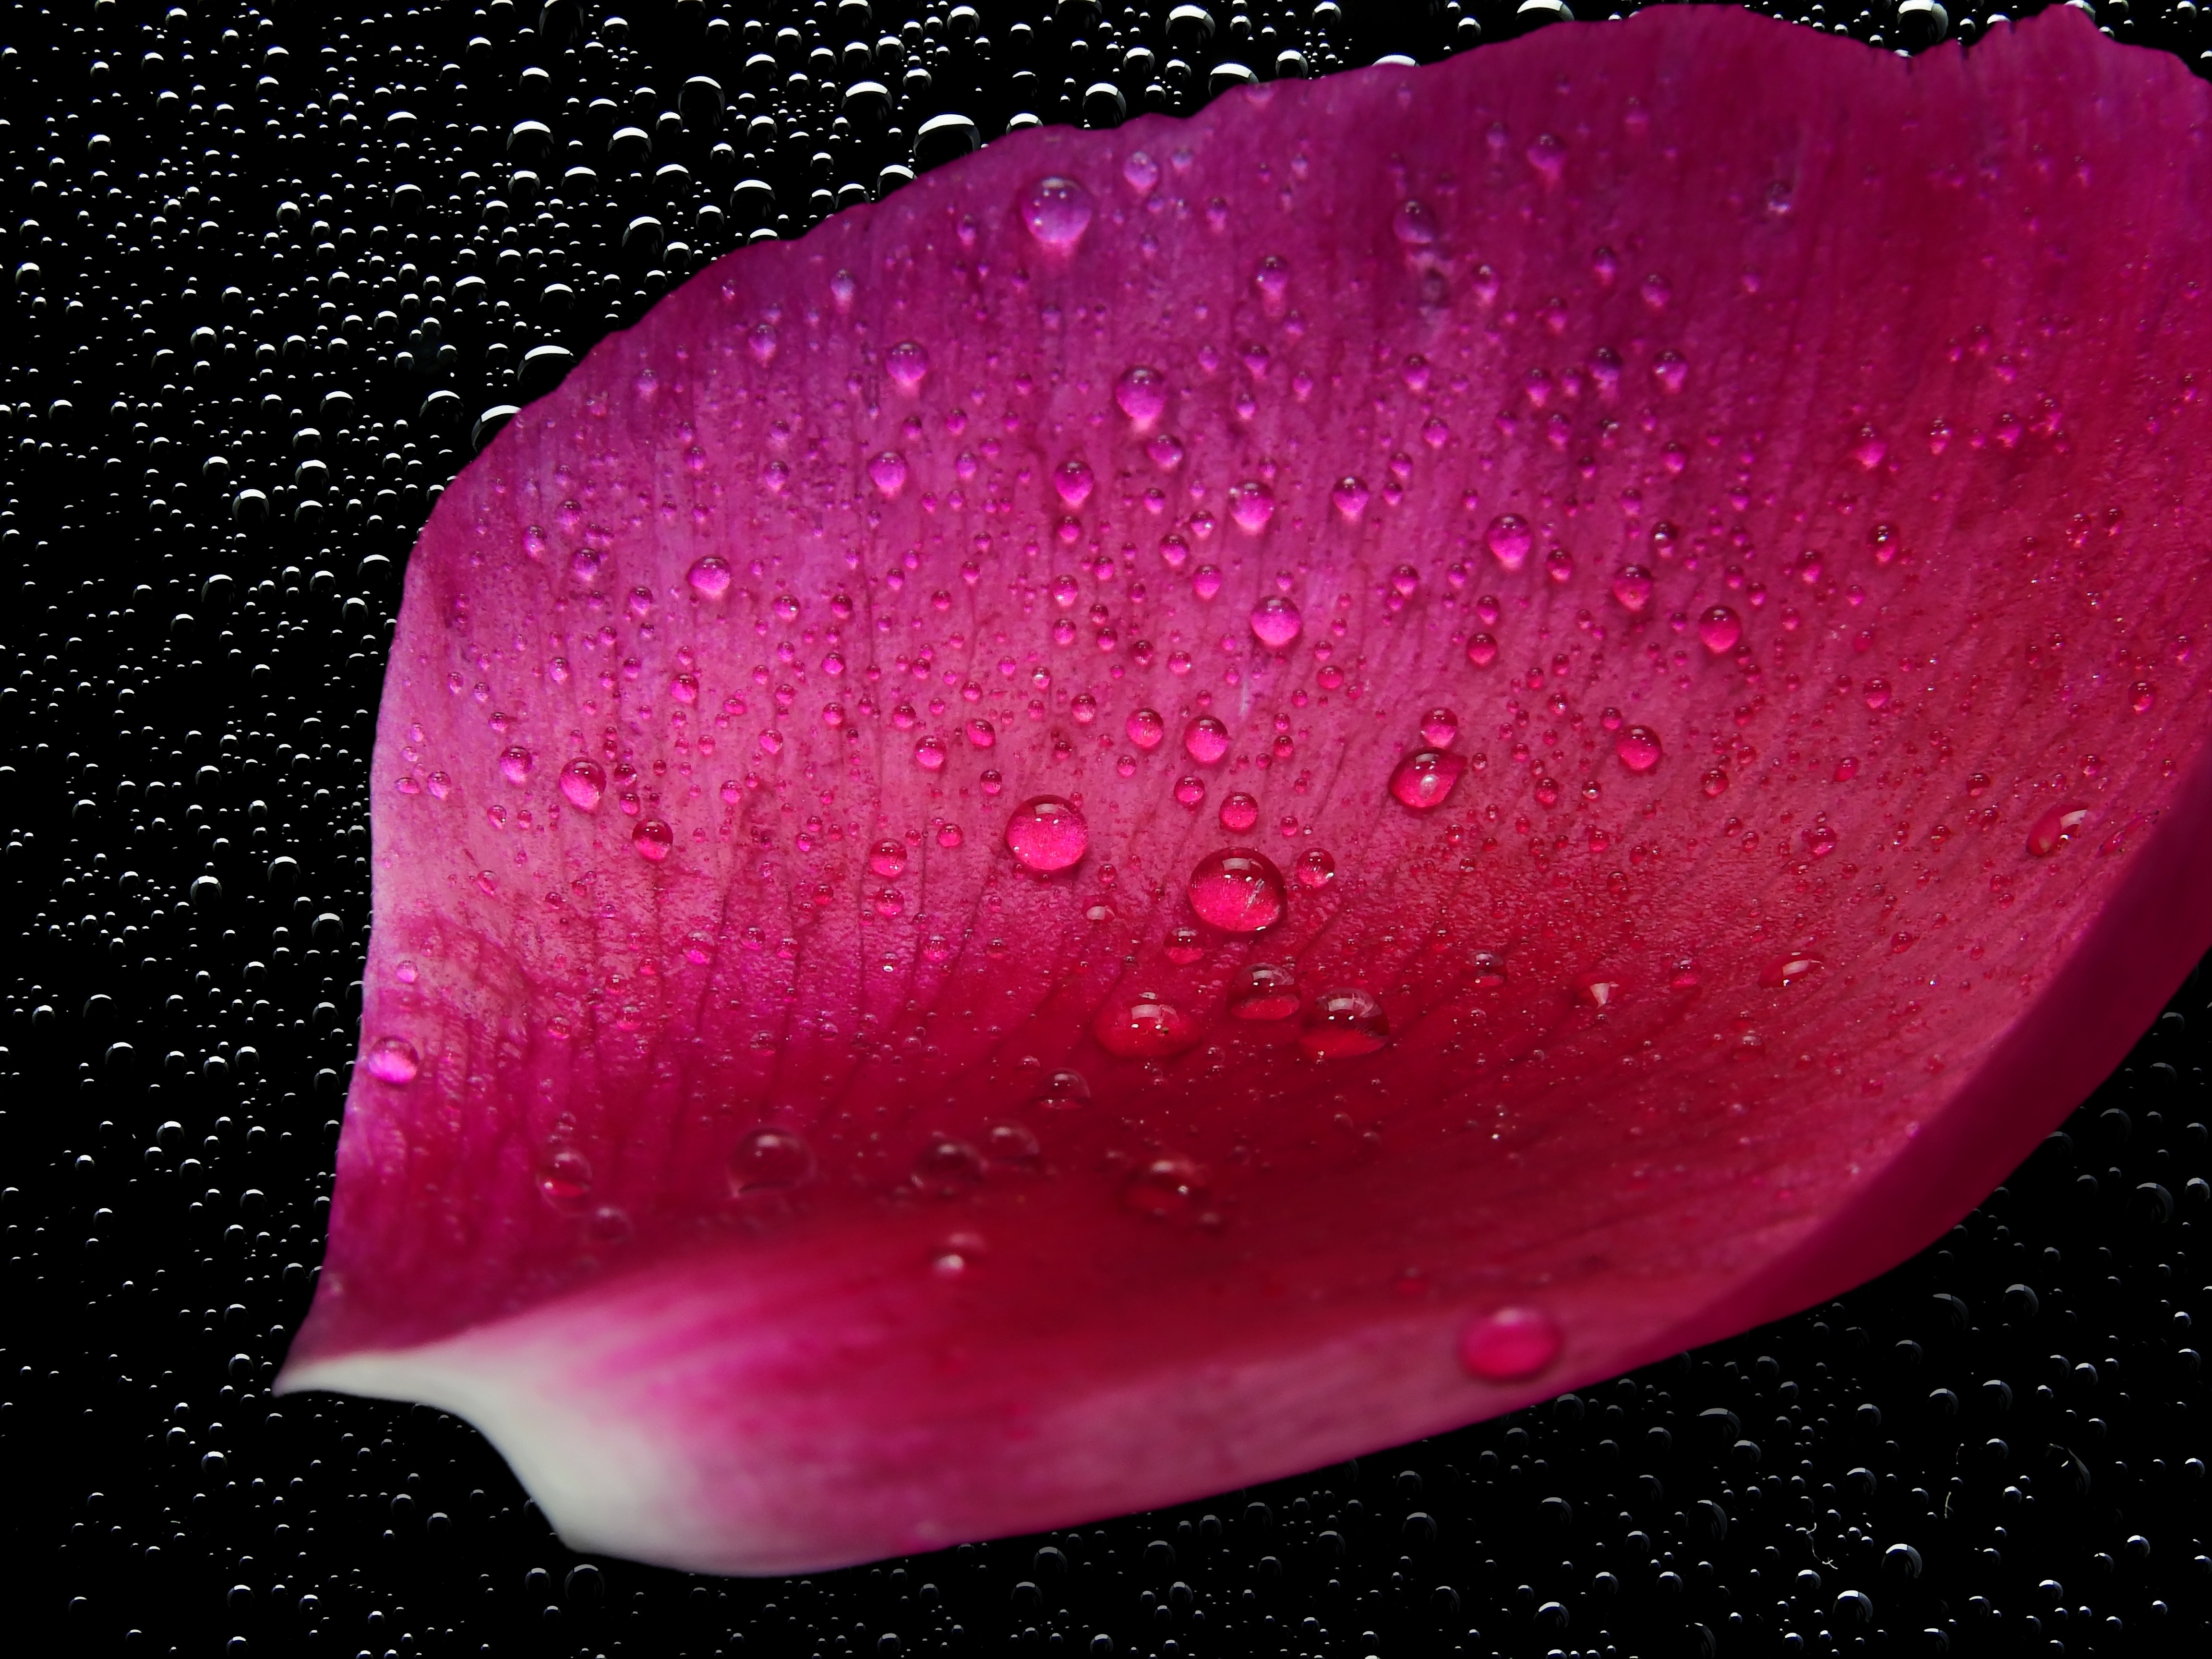 pink flower petal with water drops